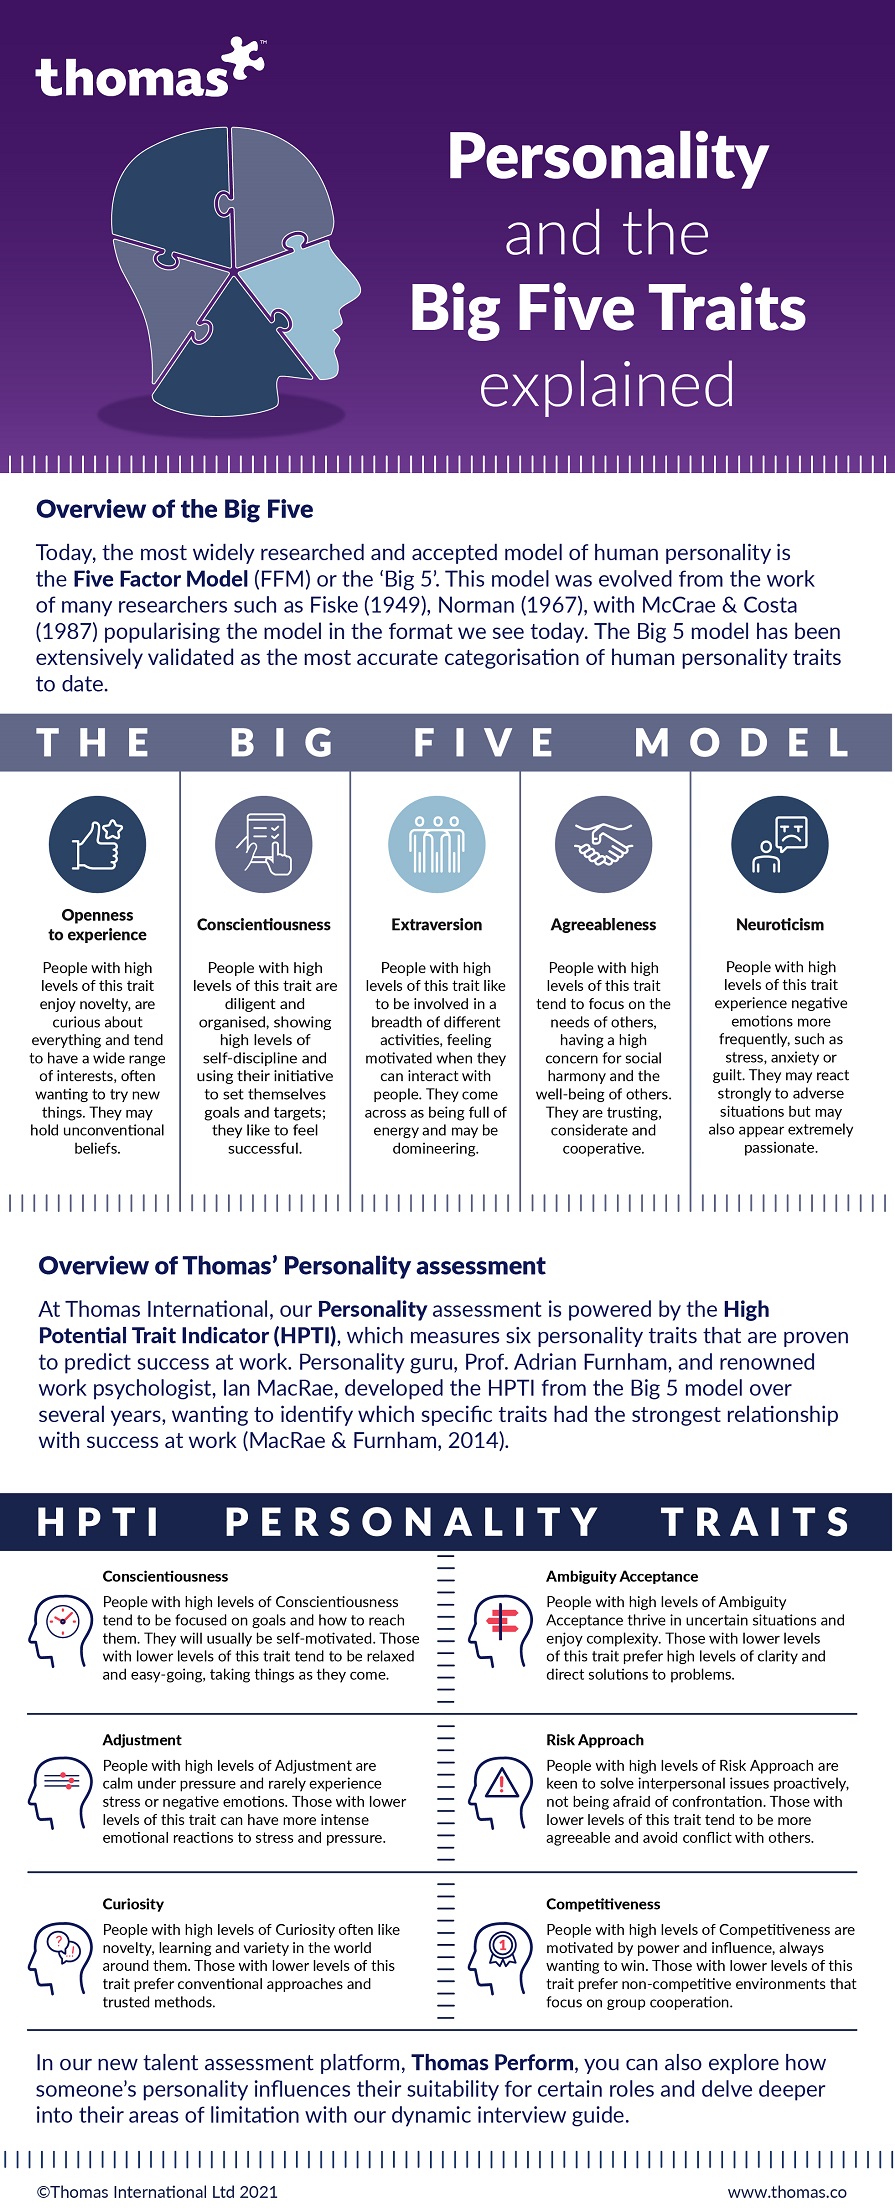 Personality and the Big Five Traits explained infographic